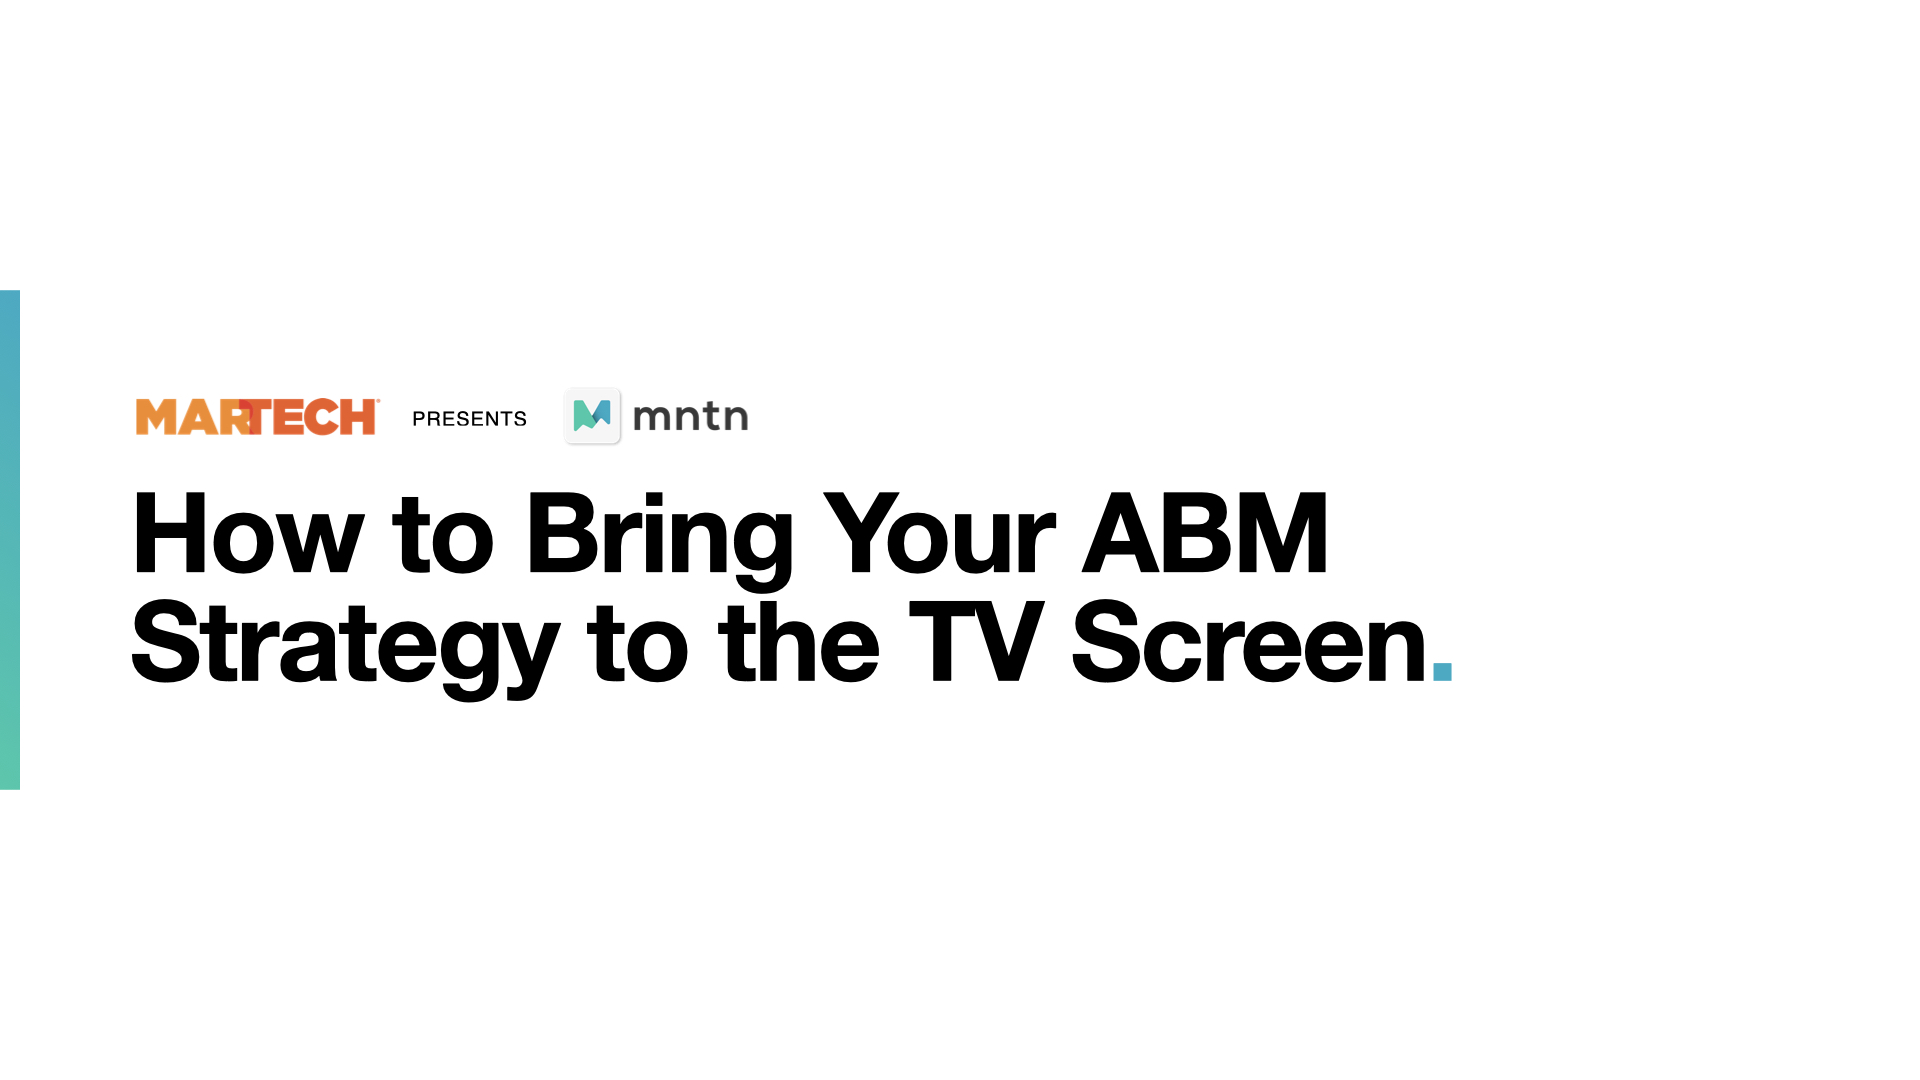 How to Bring Your ABM Strategy to the TV Screen